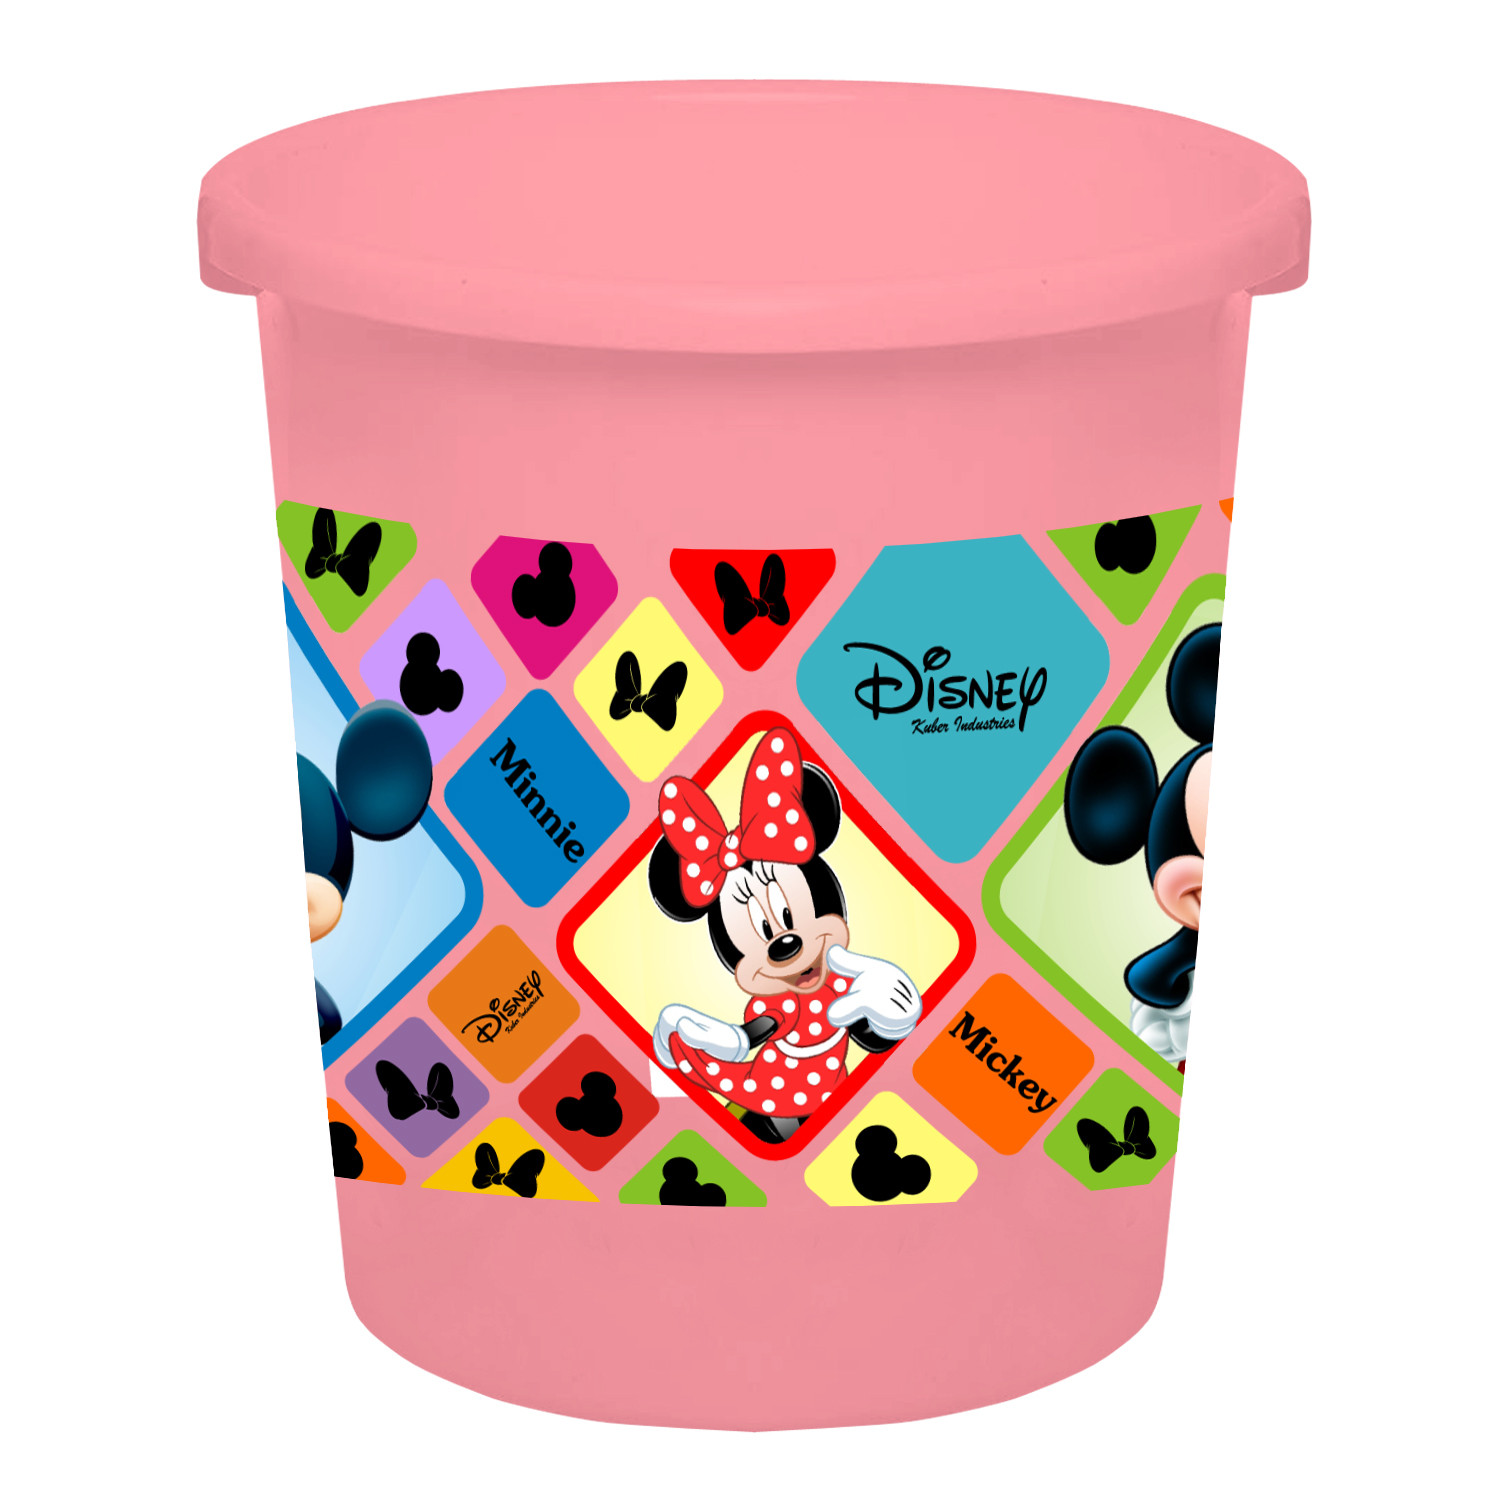 Kuber Industries Disney Mickey Minnie Print Plastic 2 Pieces Garbage Waste Dustbin/Recycling Bin for Home, Office, Factory, 5 Liters (Pink & White) -HS_35_KUBMART17791